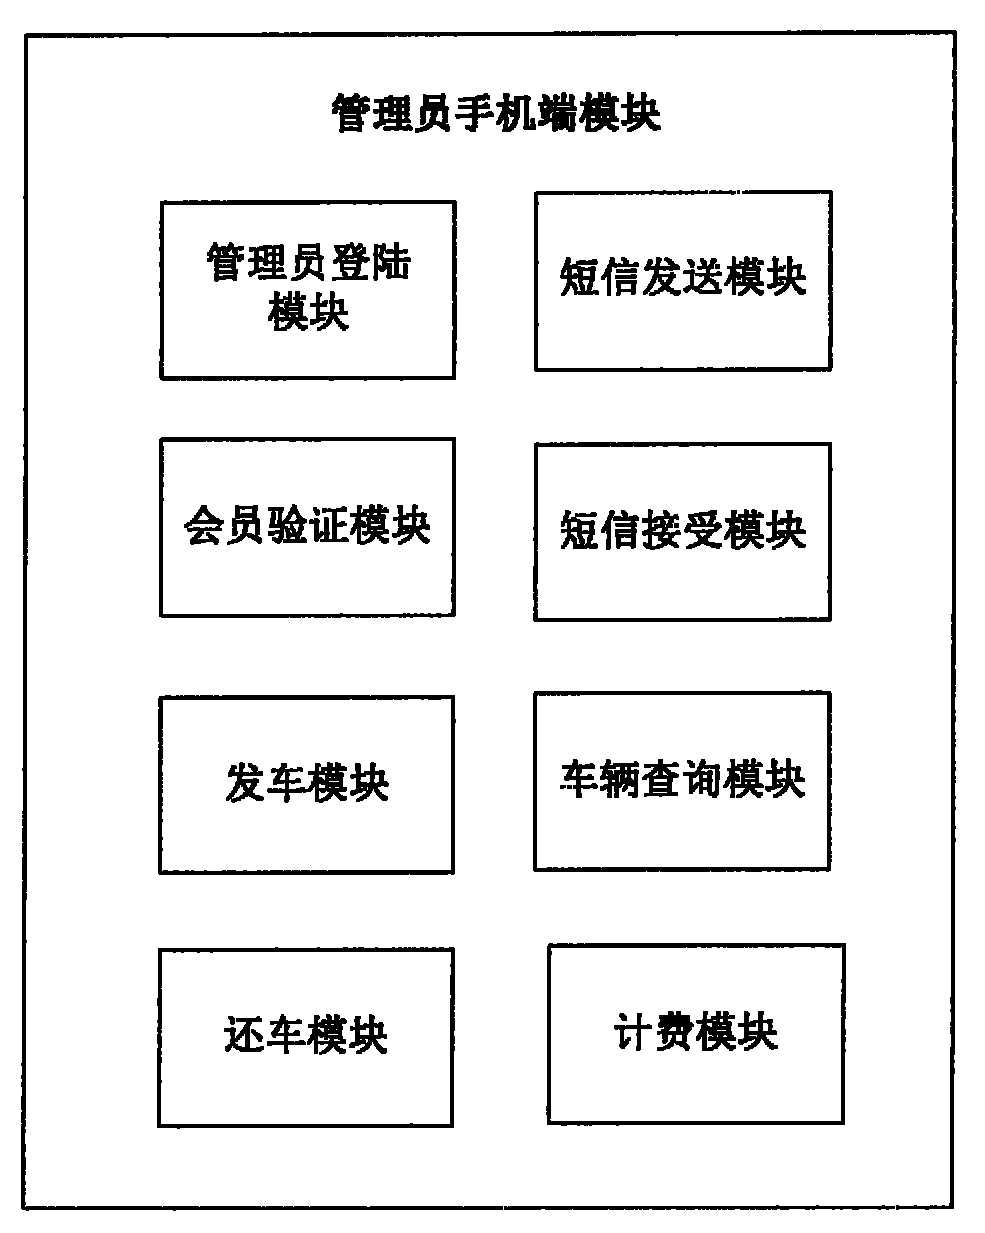 Managing system and method for cellphone application in mobile lease and restitution of vehicle